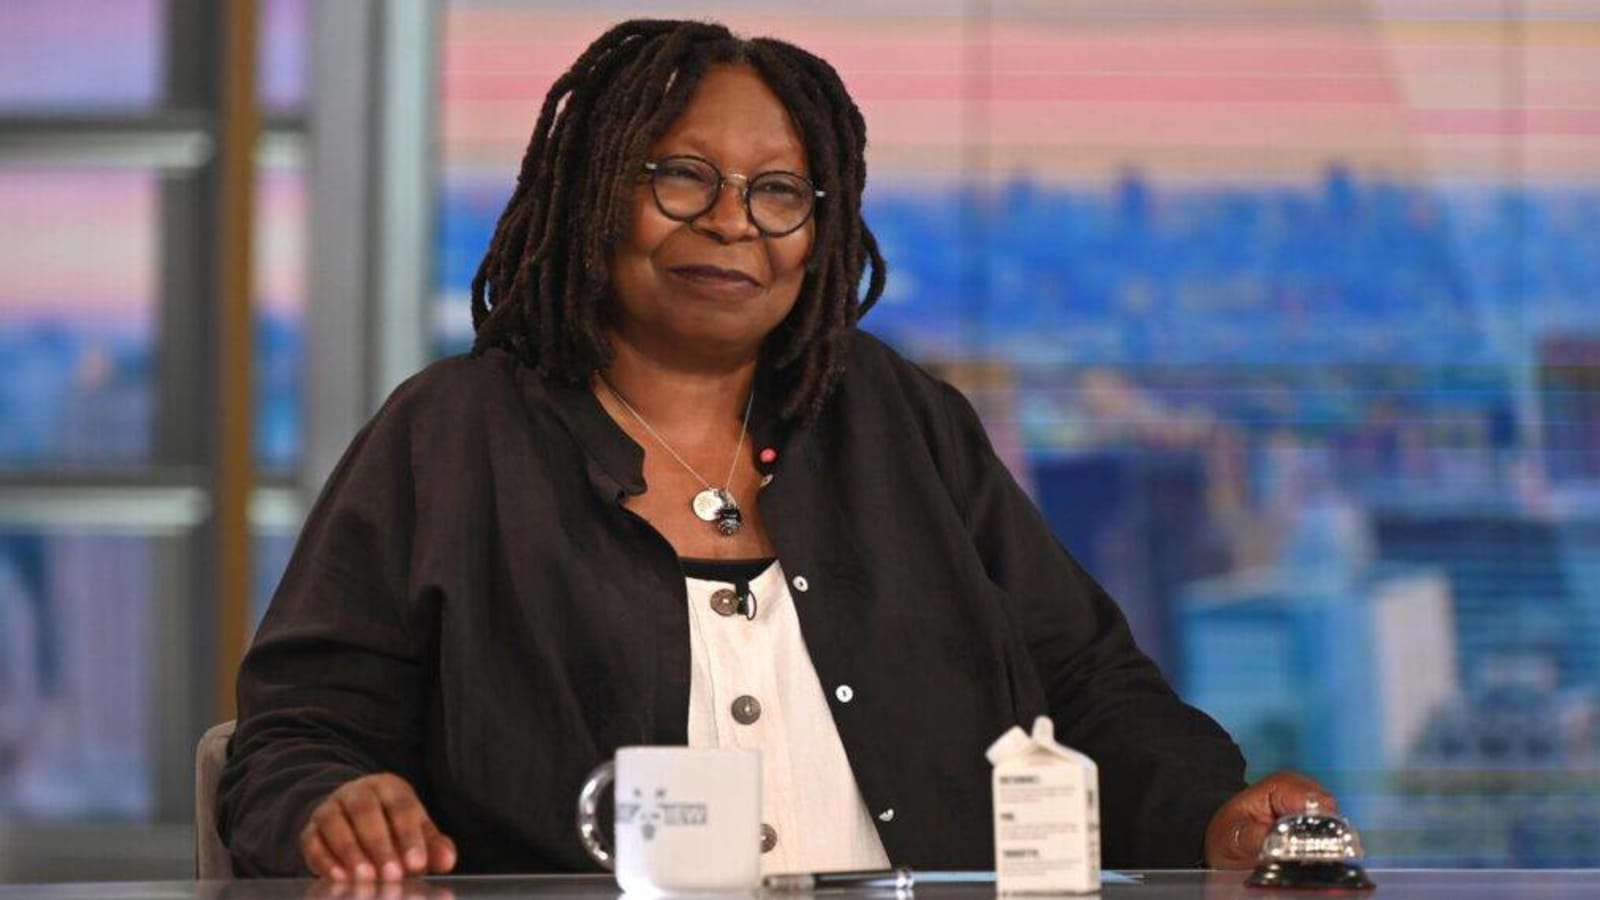 ‘The View’: Whoopi Goldberg Slams the Media for College Protests Coverage